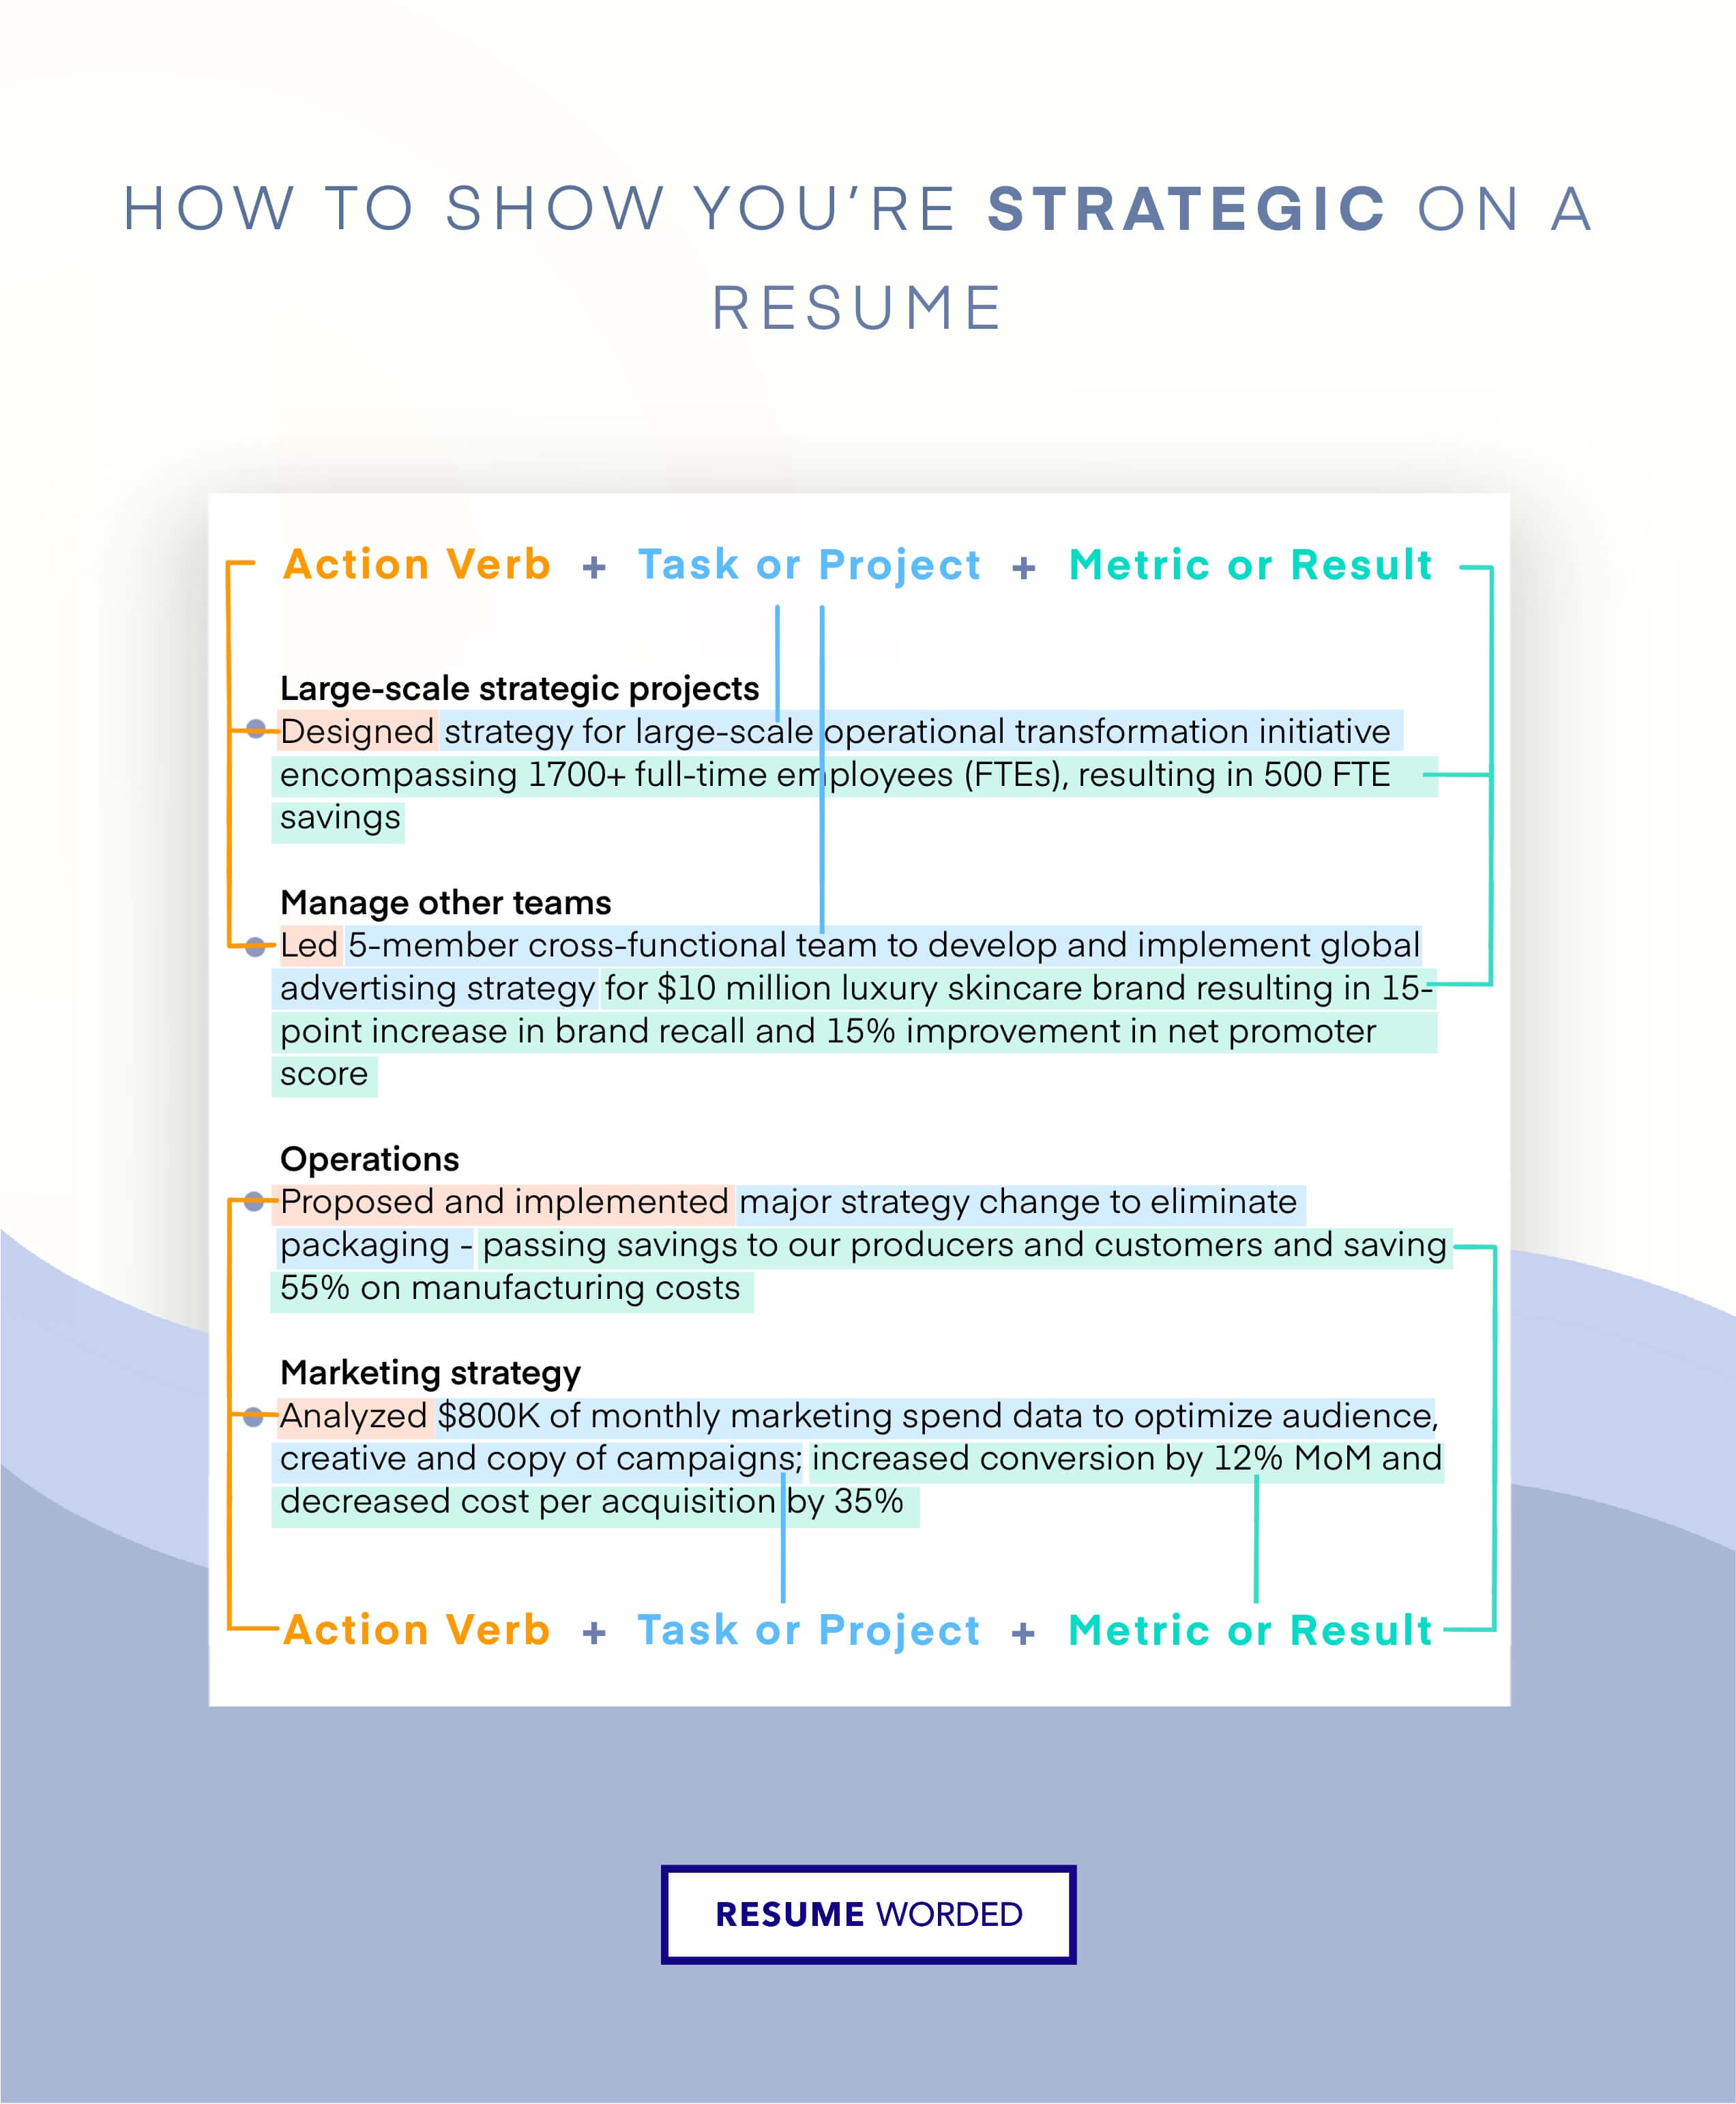 Emphasize on Strategic Planning and Leadership - IT Infrastructure Manager Resume